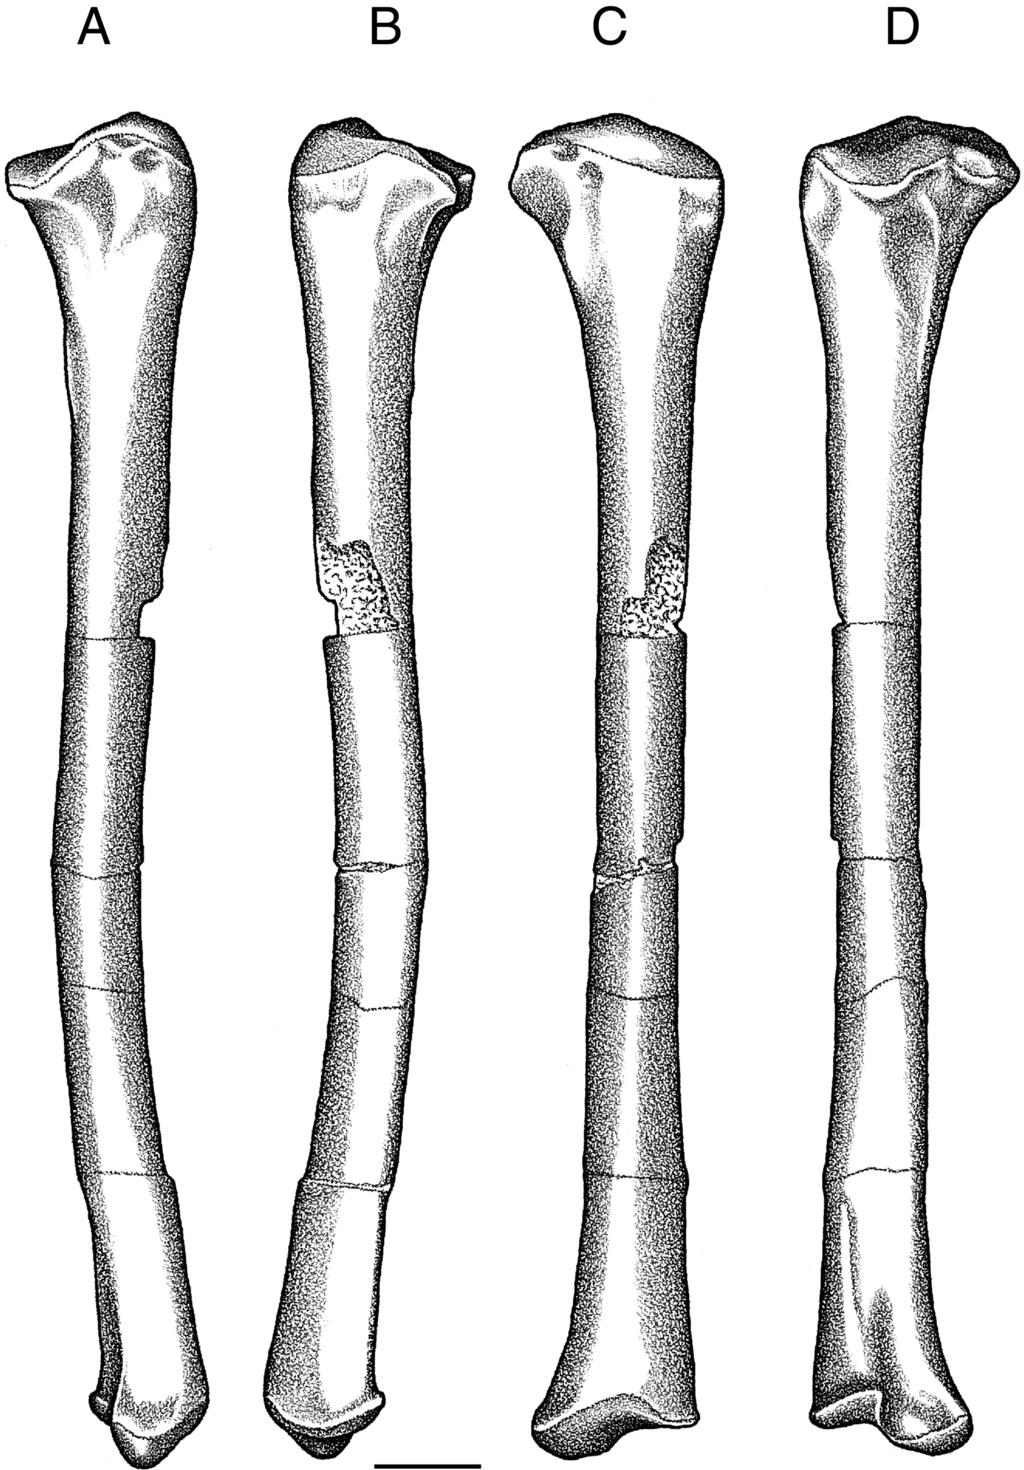 338 JOURNAL OF VERTEBRATE PALEONTOLOGY, VOL. 23, NO. 2, 2003 FIGURE 7. Dromicosuchus grallator, UNC 15574 (holotype), left tibia in A, medial; B, lateral; C, anterior; and D, posterior views.